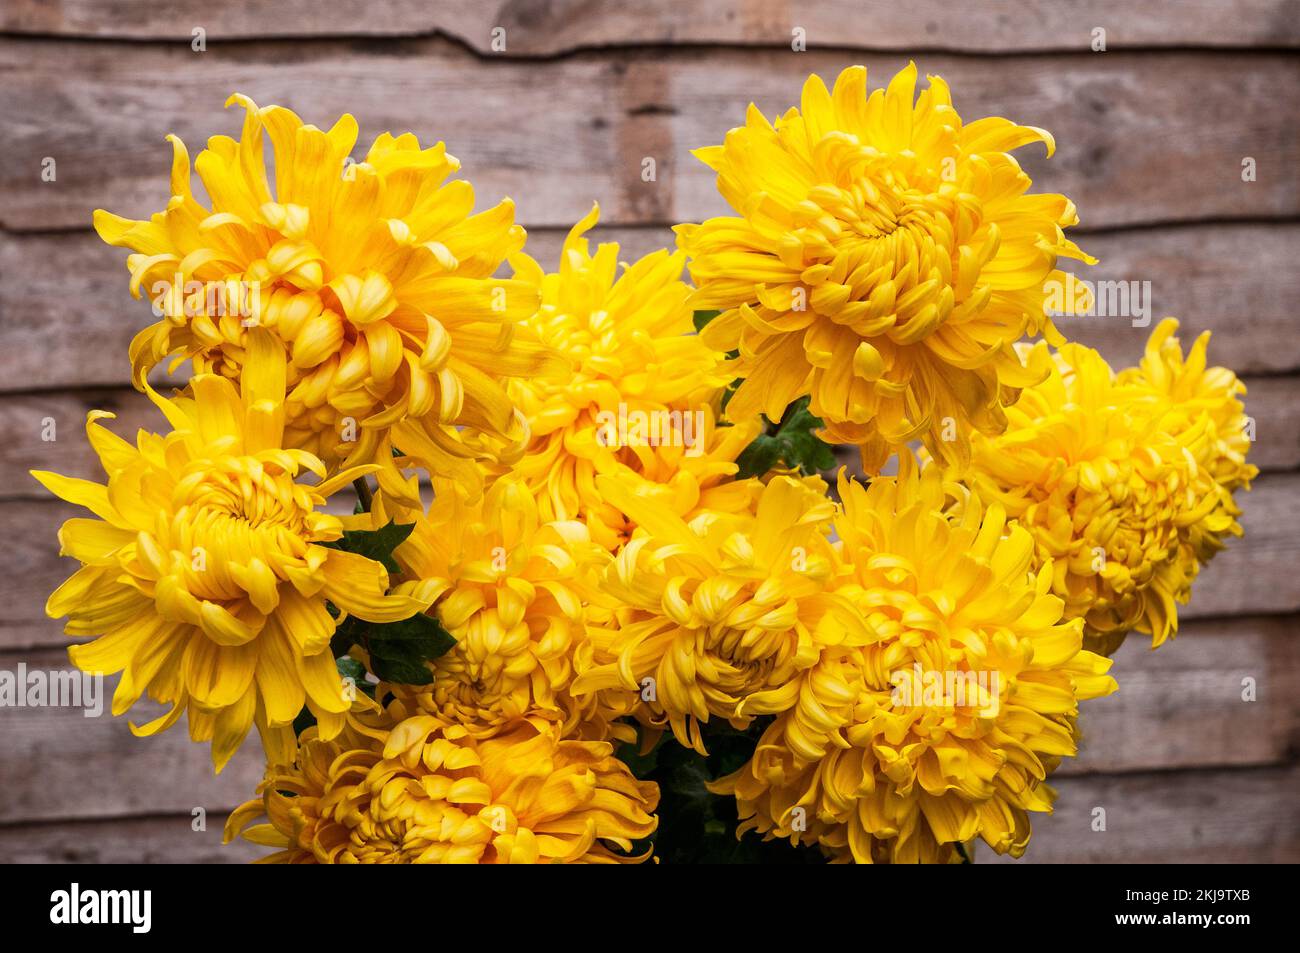 Close up of a group of non - disbudded Chrysanthemum / Dendranthema Cheddar a deep yellow incurve that flowers in autumn Stock Photo